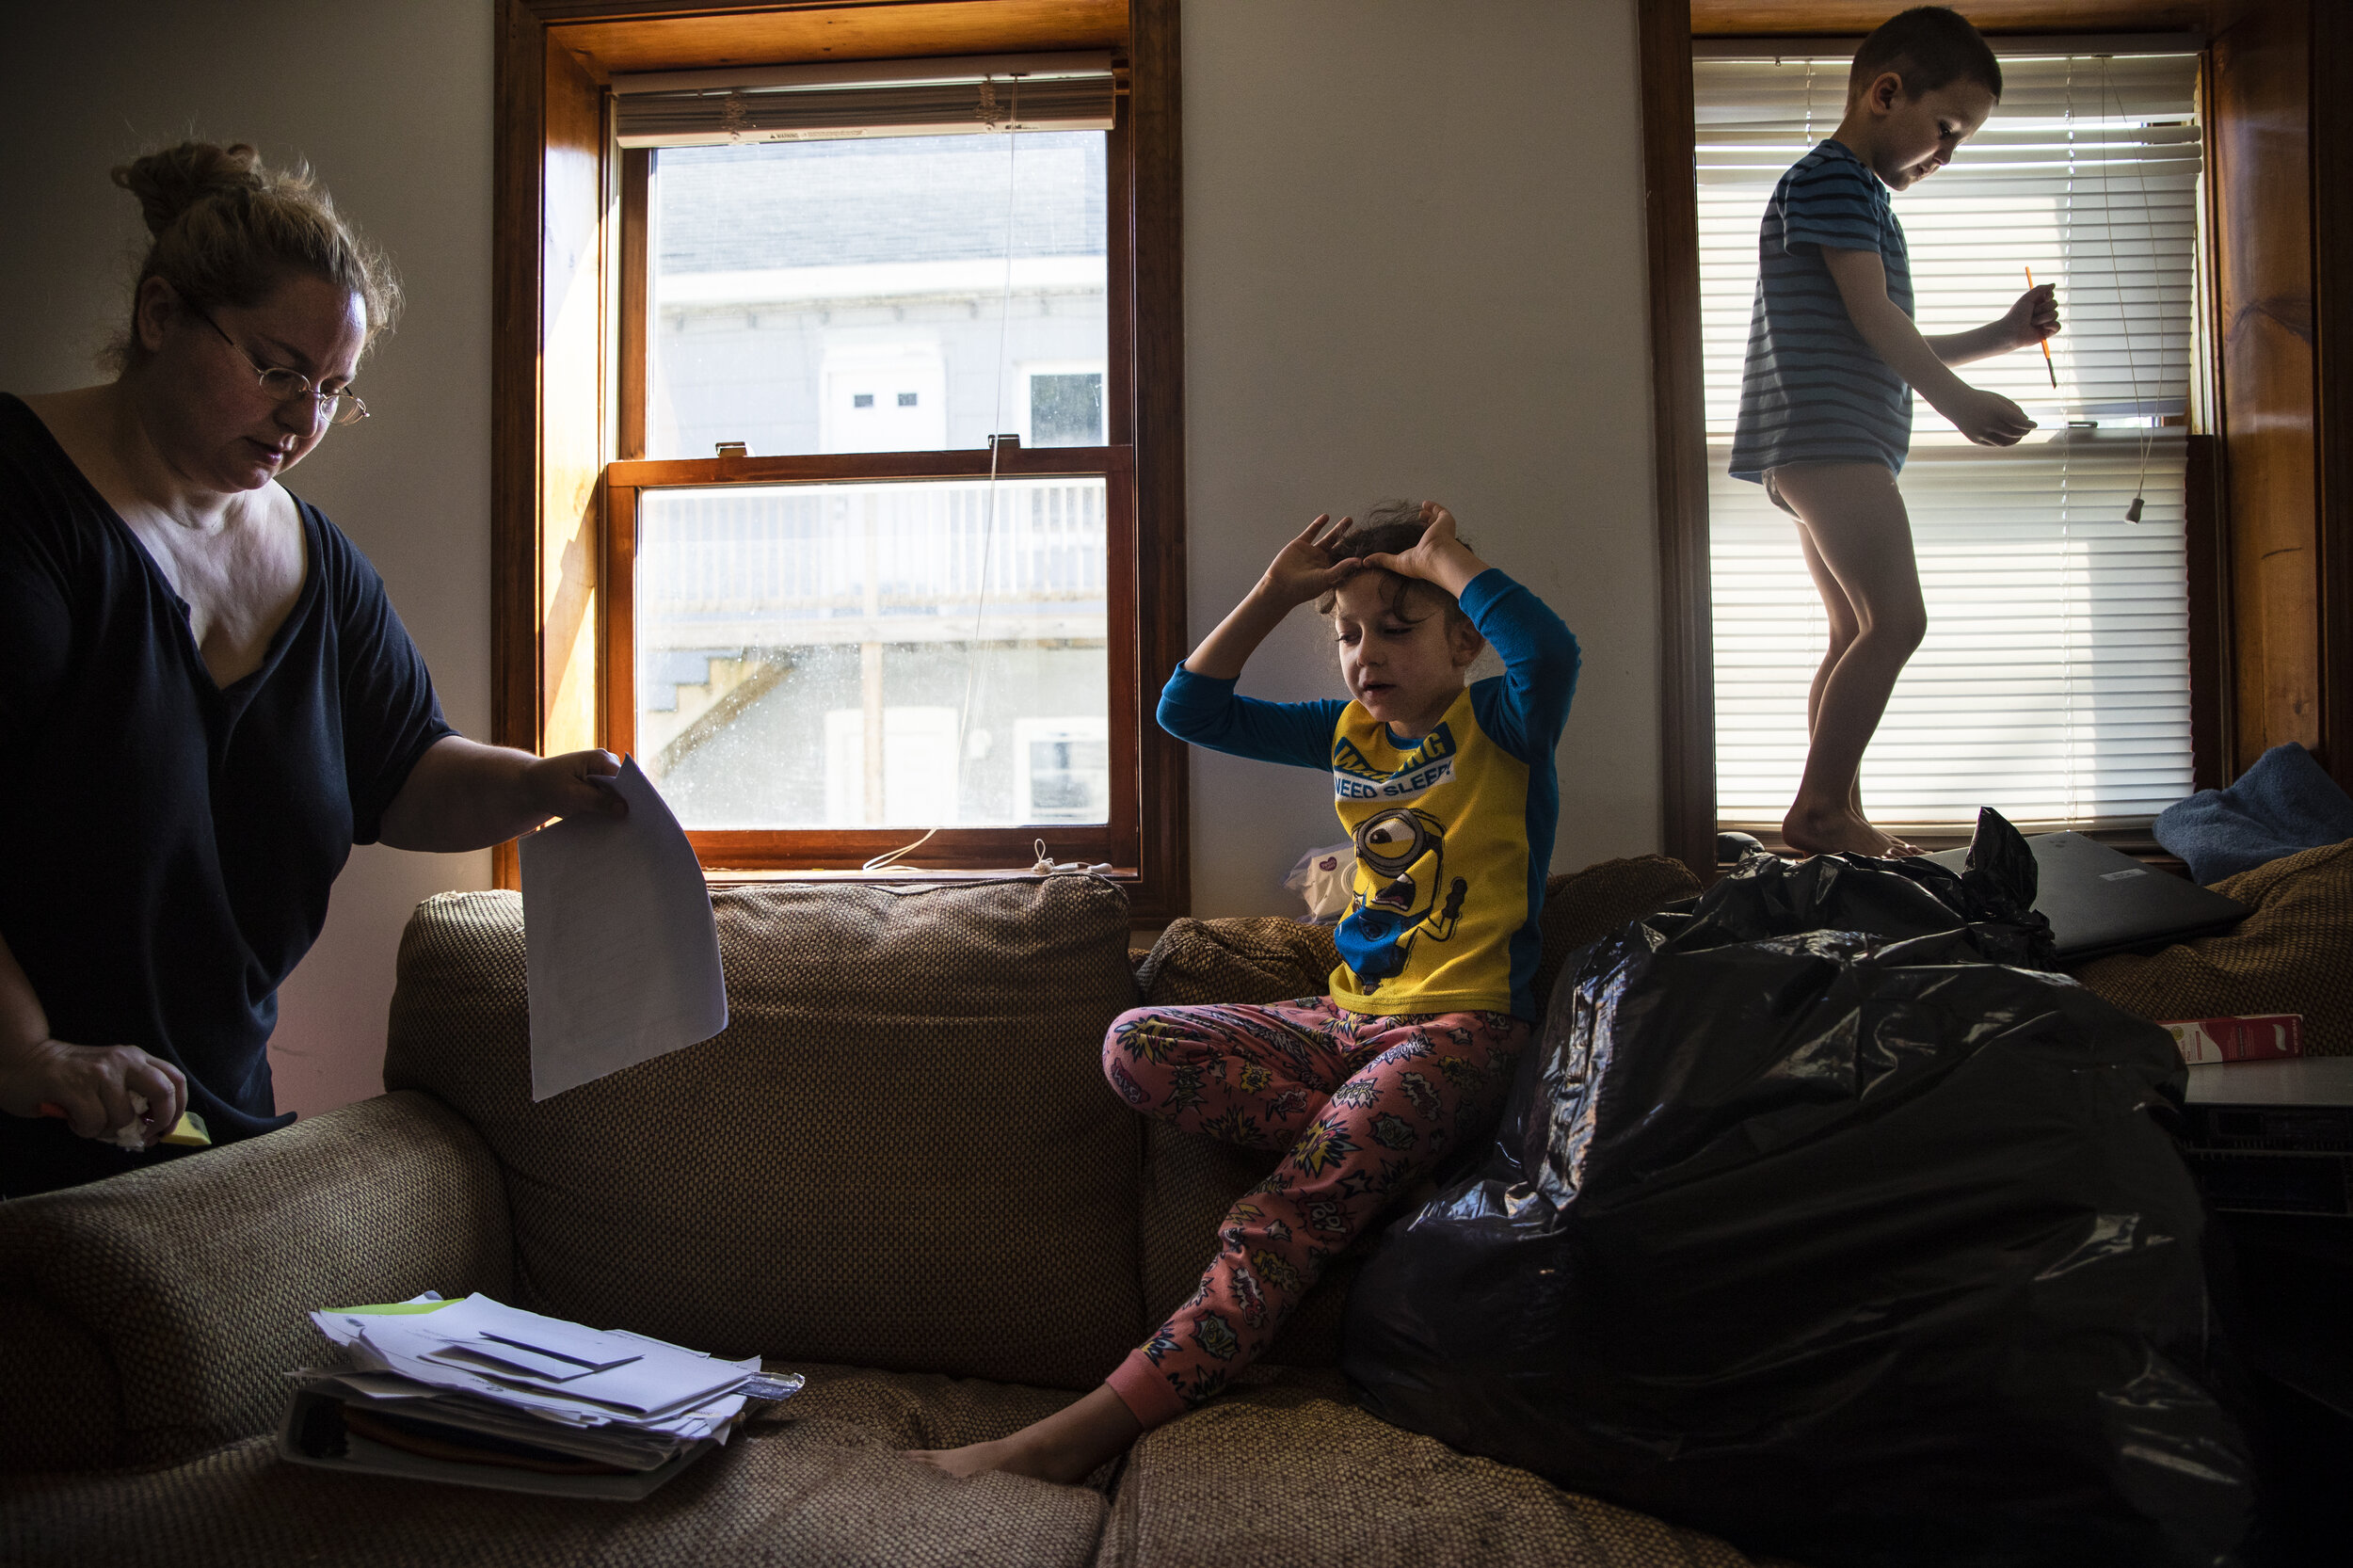 Mariah LeMieux-Lupien organizes paperwork while Evan, center, and Dylan play on the couch. "You just try and do everything right and then 'pftt', you're out," says Mariah, while sorting through her pa